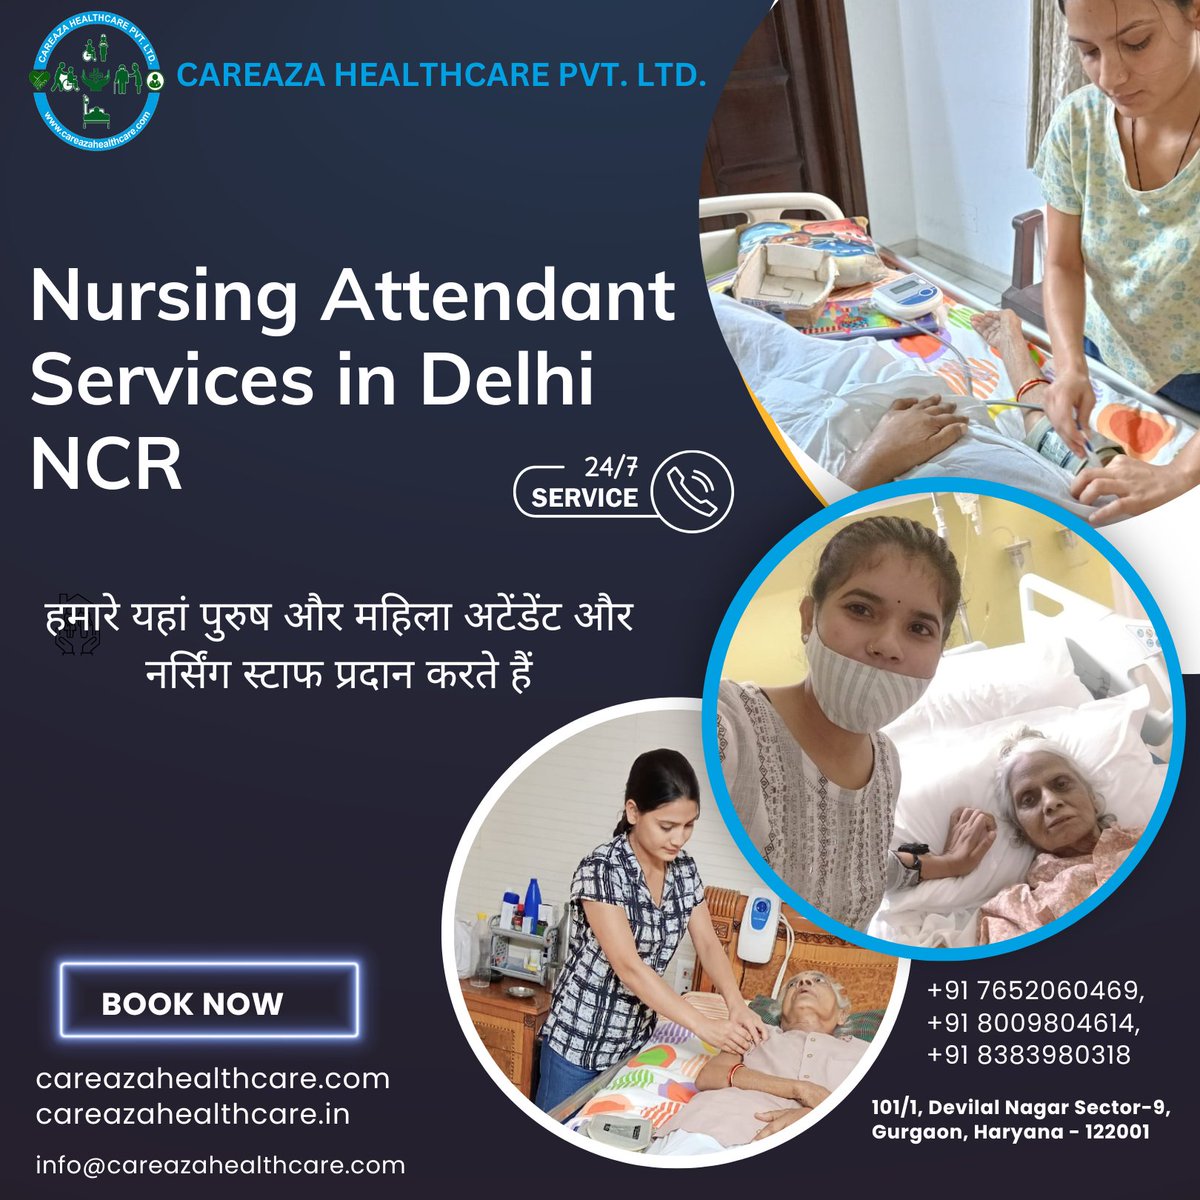 Careaza Healthcare provides 24 hours Nursing Attendant Care For Home Or Hospital in Delhi/NCR. If you are looking for nursing care, then connect with us.

#HomeHealthcare, #Healthcare, #NursingCare, #ElderCare, #CriticalCare, #CareazaHealthcare